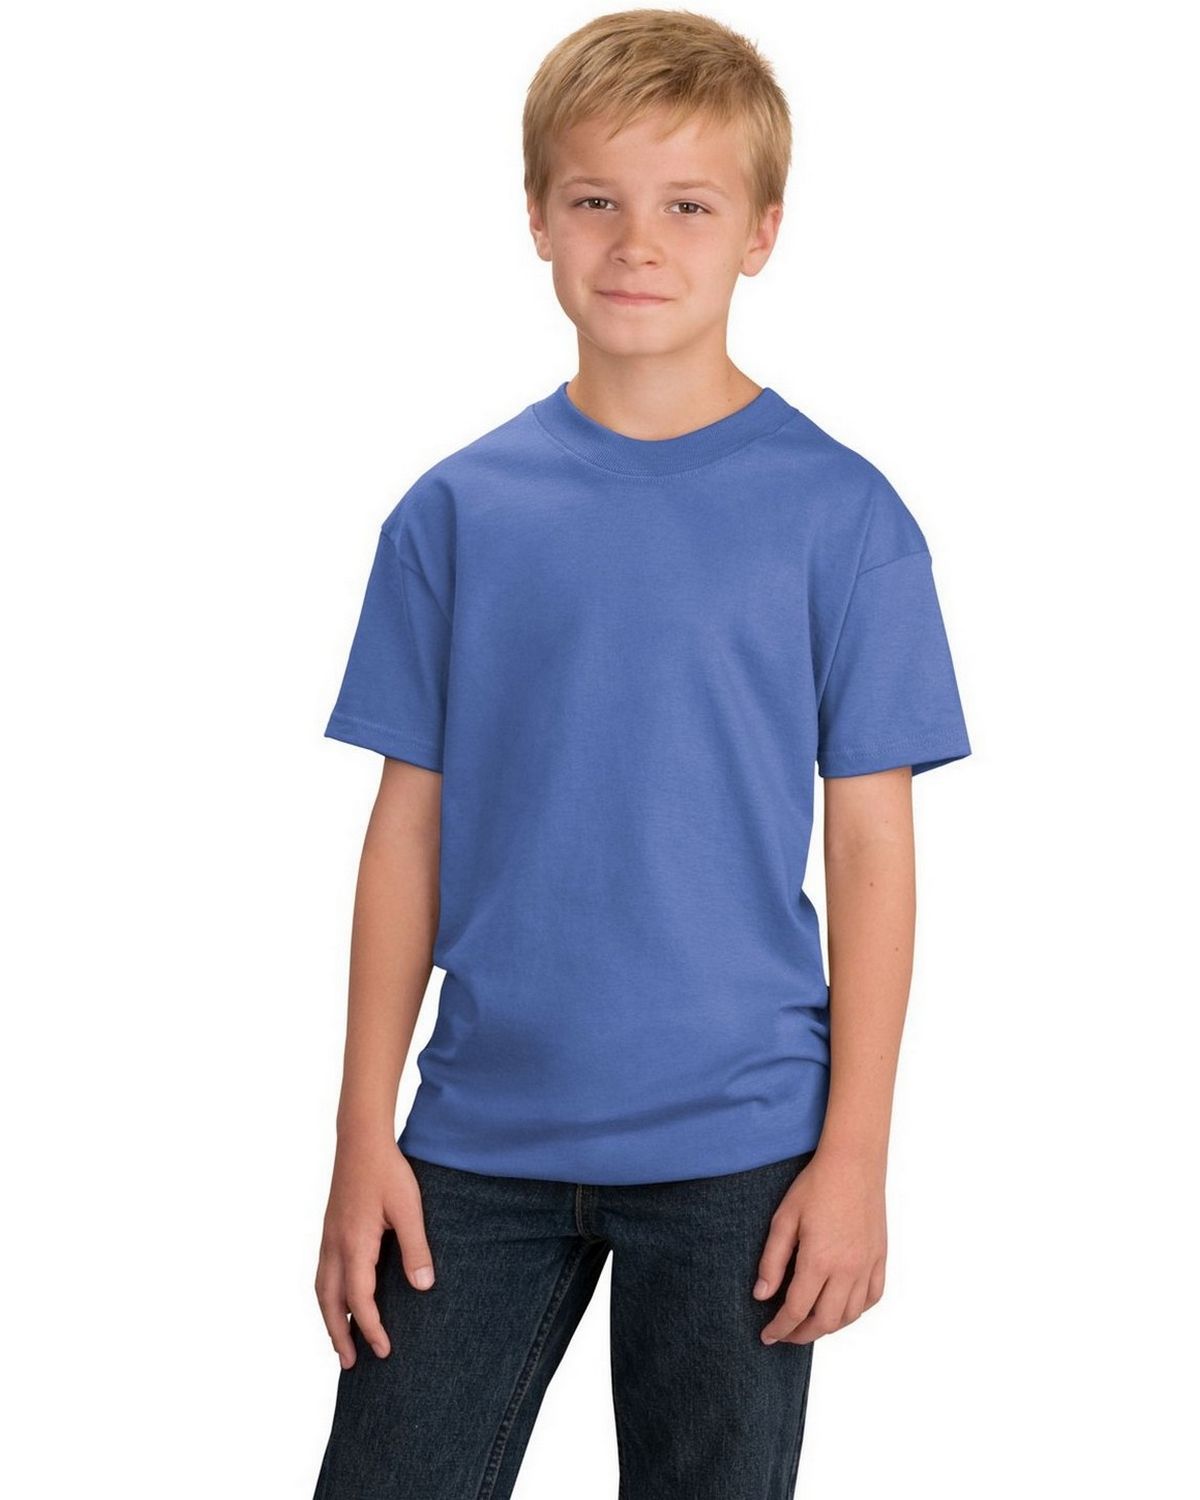 UPC 011919000845 product image for Port & Company PC61Y Youth Essential T-Shirt - Ultramarine Blue - XS | upcitemdb.com